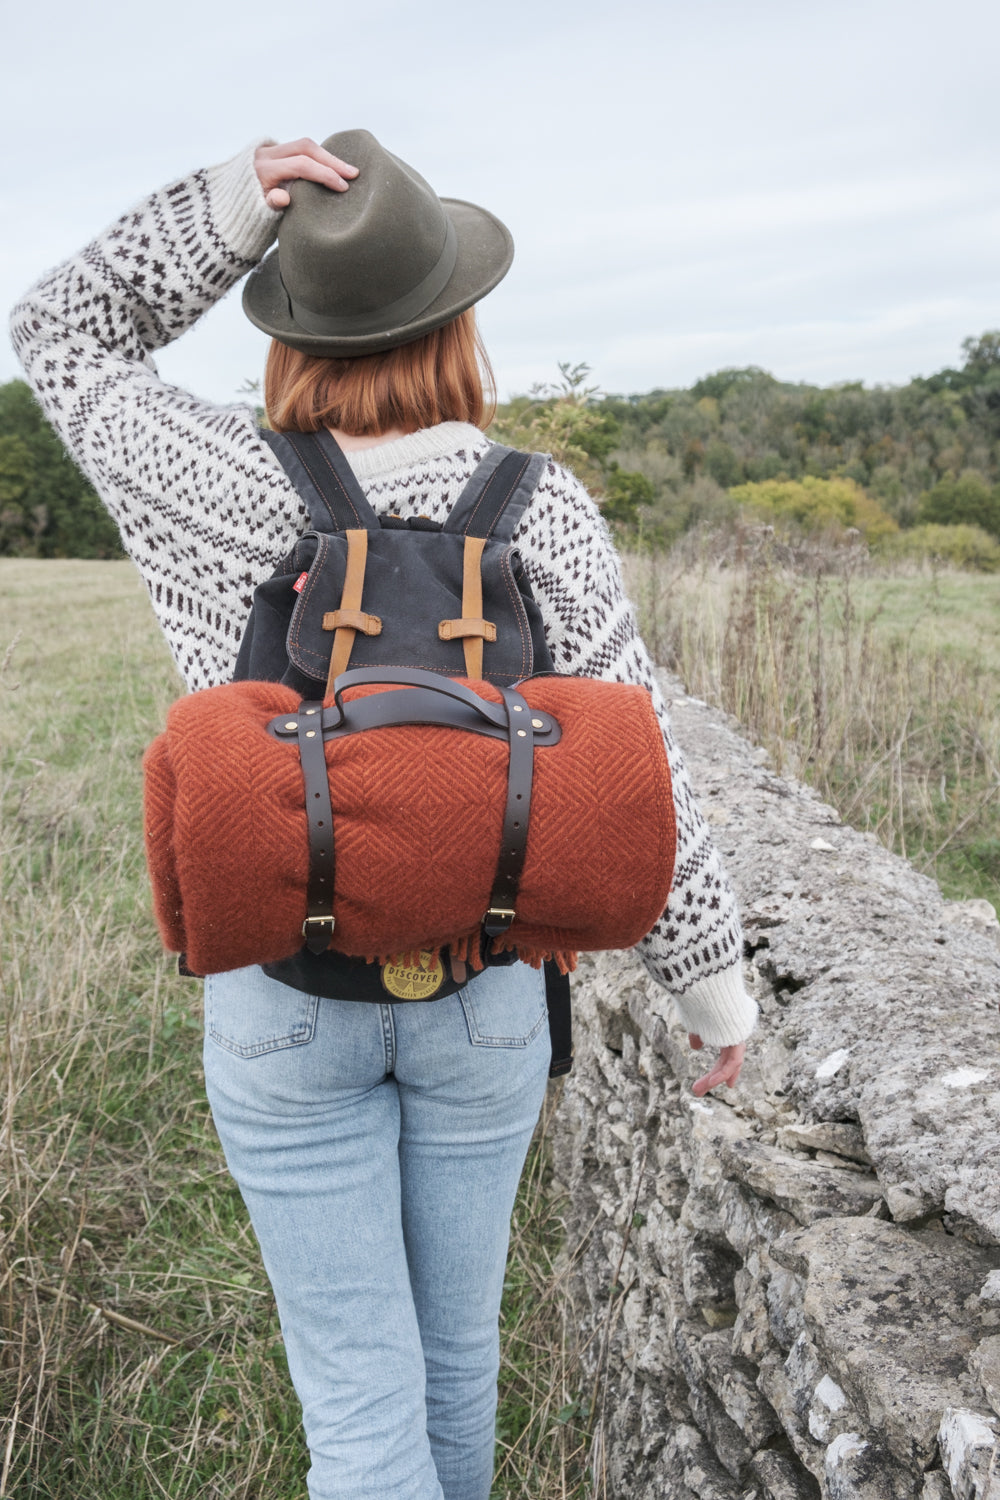 Woman with red wool picnic blanket on backpack rucksack walking through the countryside 